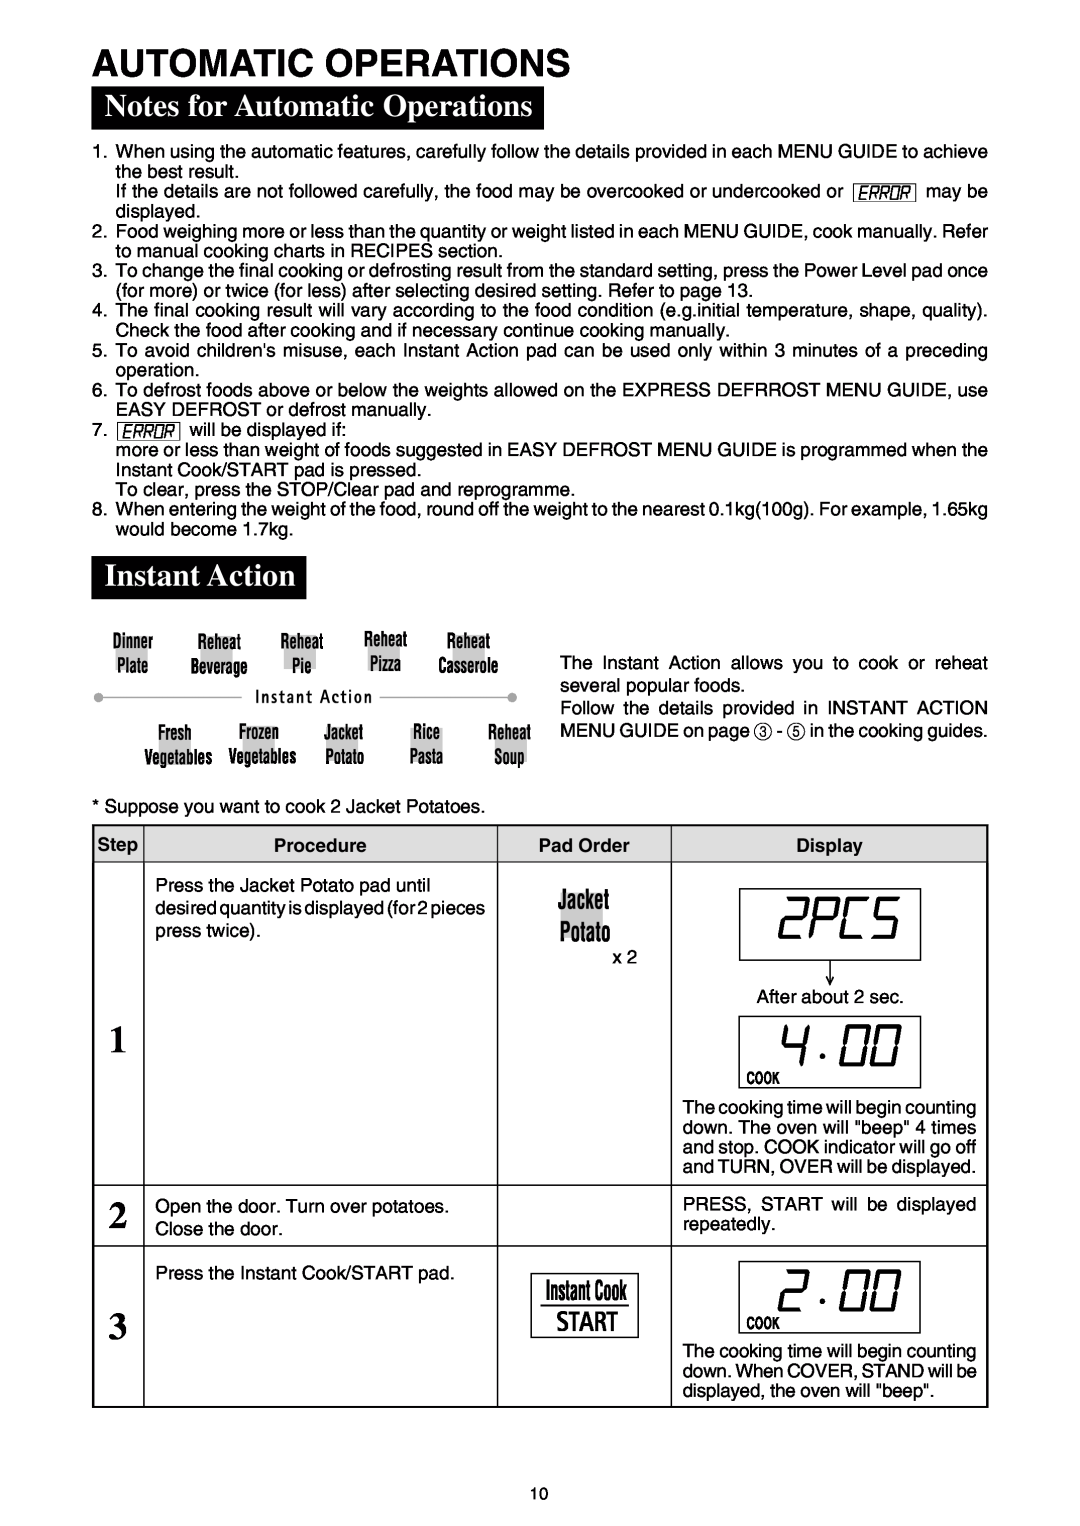 Sharp R-520E manual Notes for Automatic Operations, Instant Action 